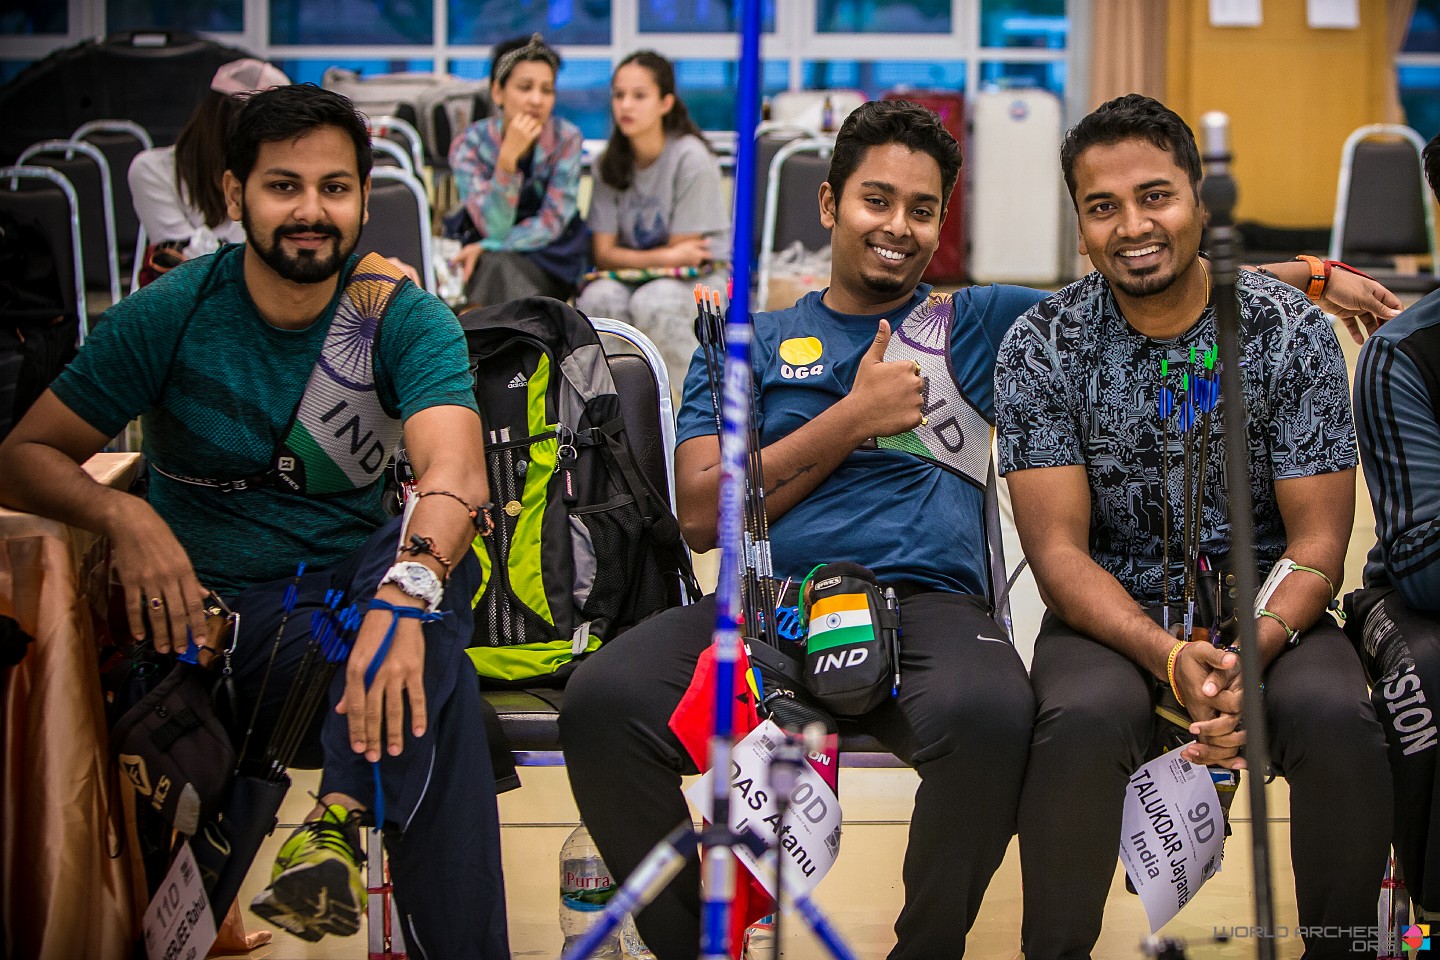 Das seeds third at Indoor World Cup in Bangkok - World Archery Official Website (press release)